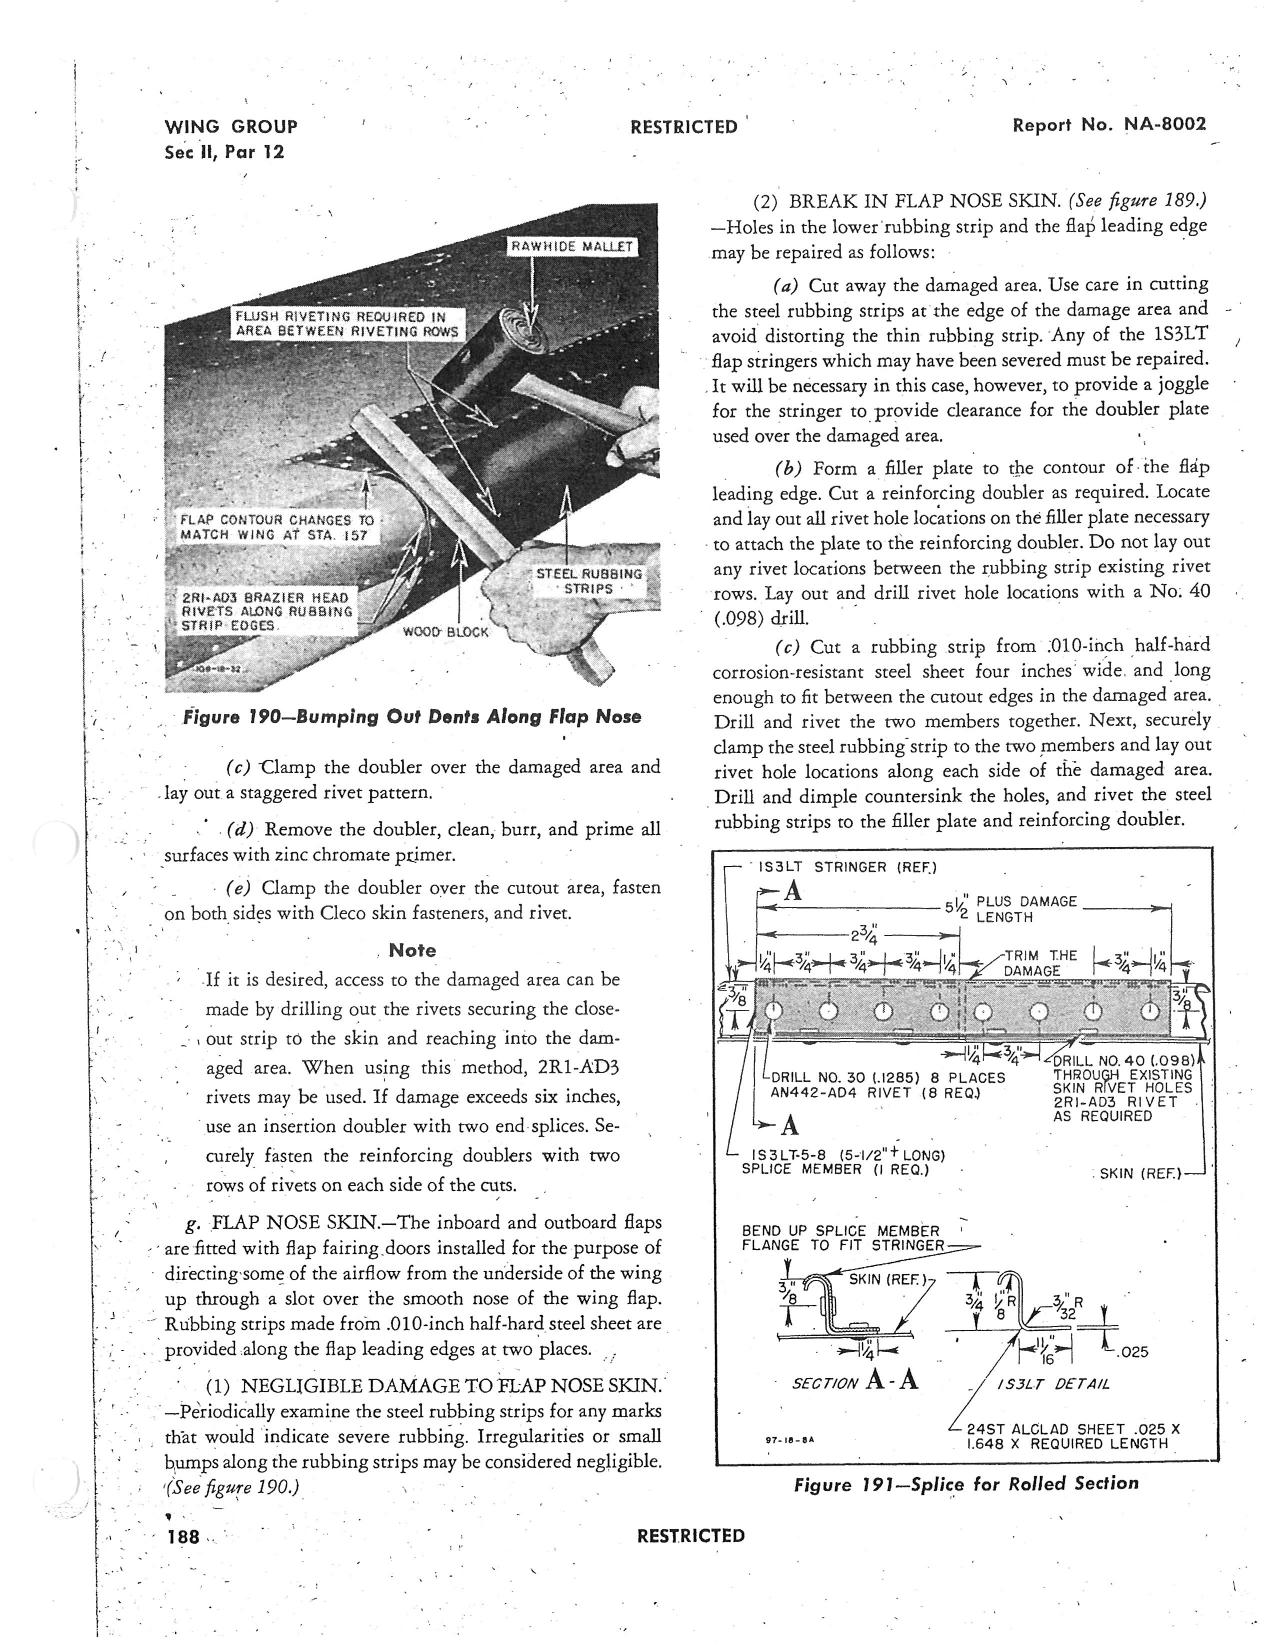 Sample page 197 from AirCorps Library document: General Repair Manual - B-25